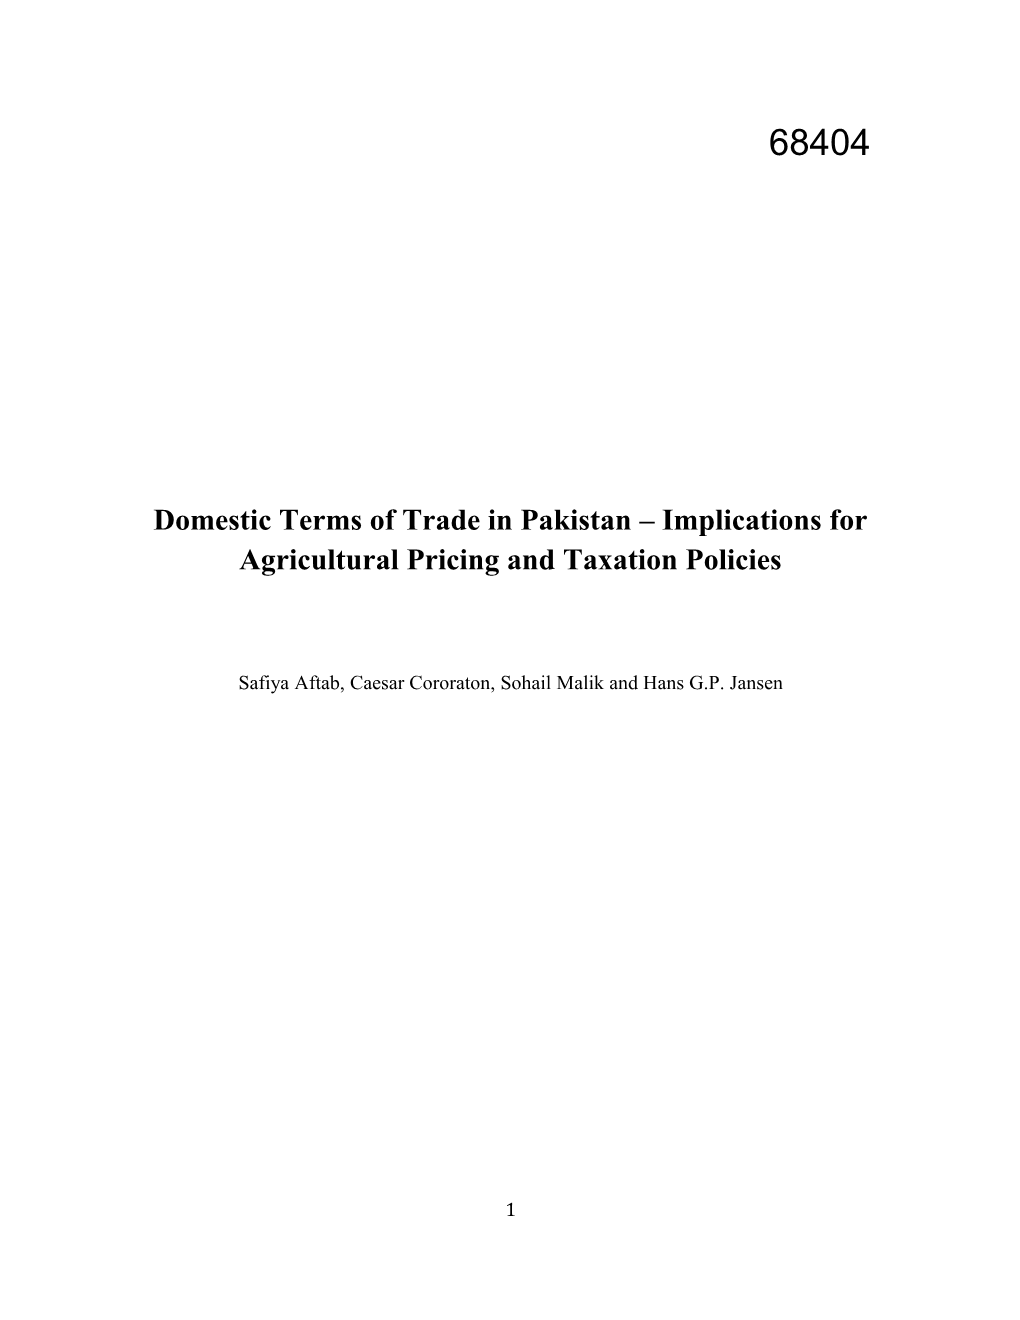 Domestic Terms of Trade in Pakistan Implications for Agricultural Pricing and Taxation